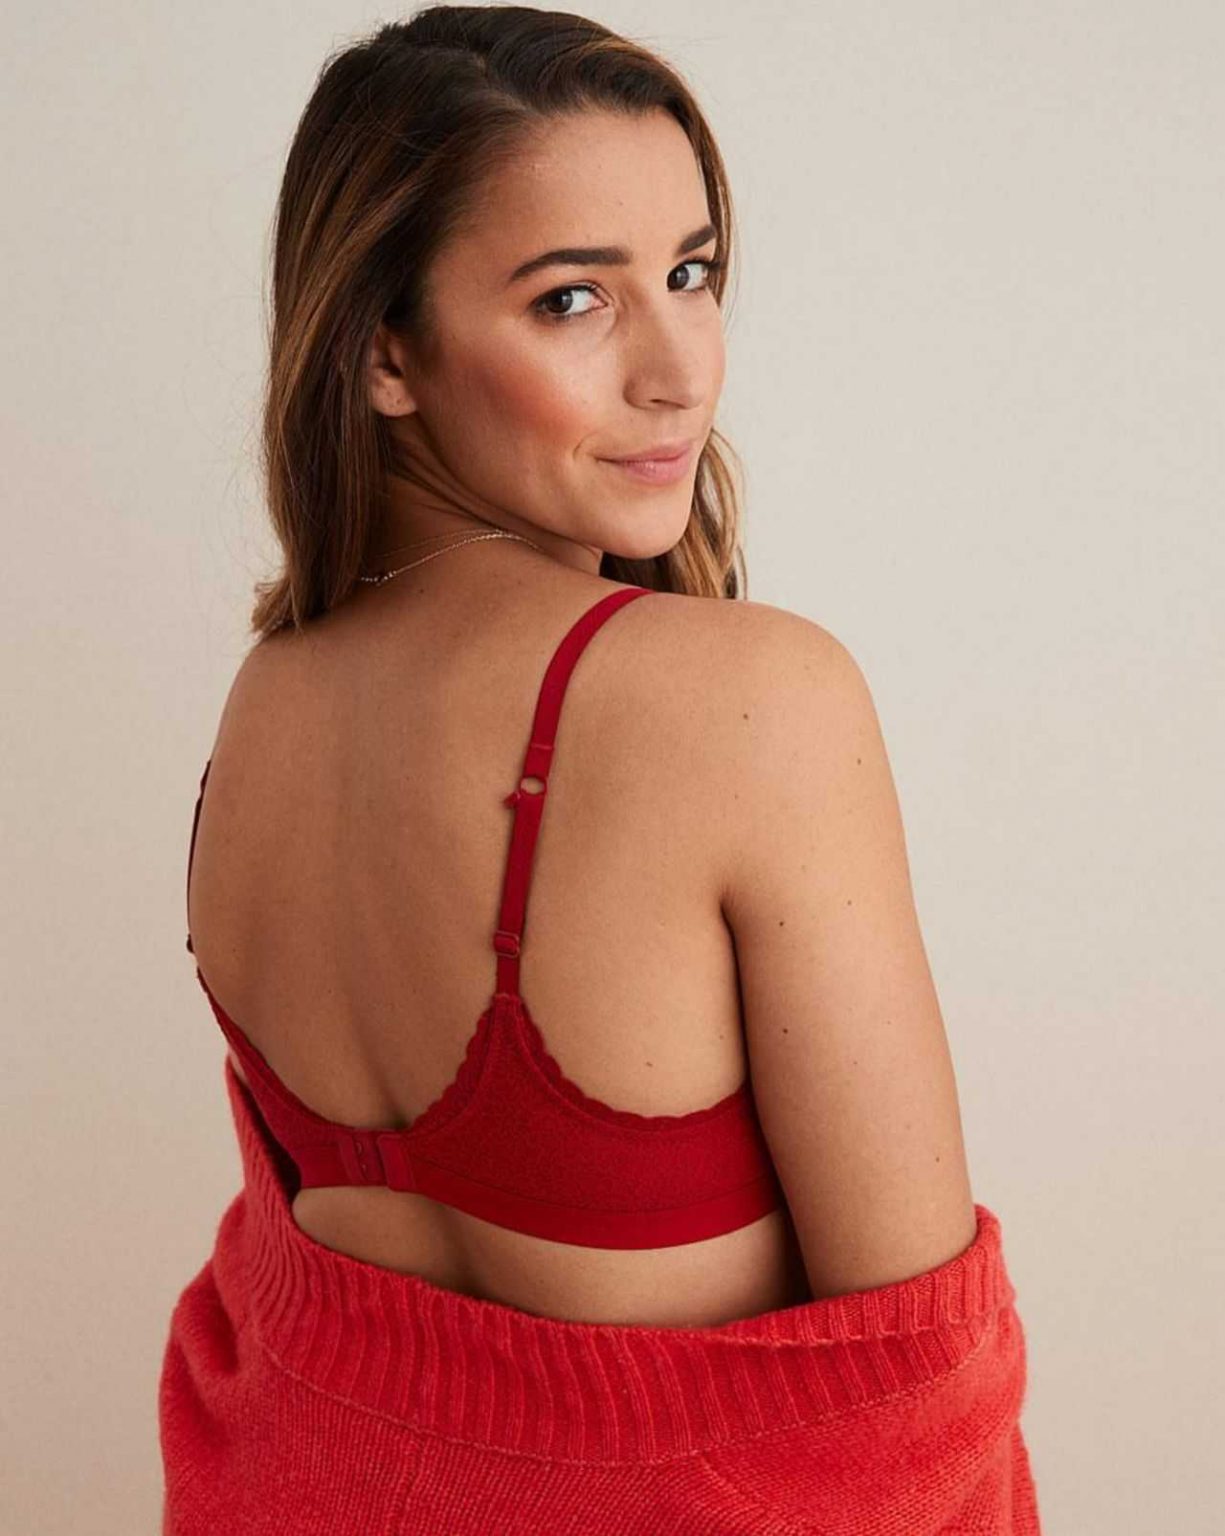 50 Hot Aly Raisman Photos Will Make Your Day Better.